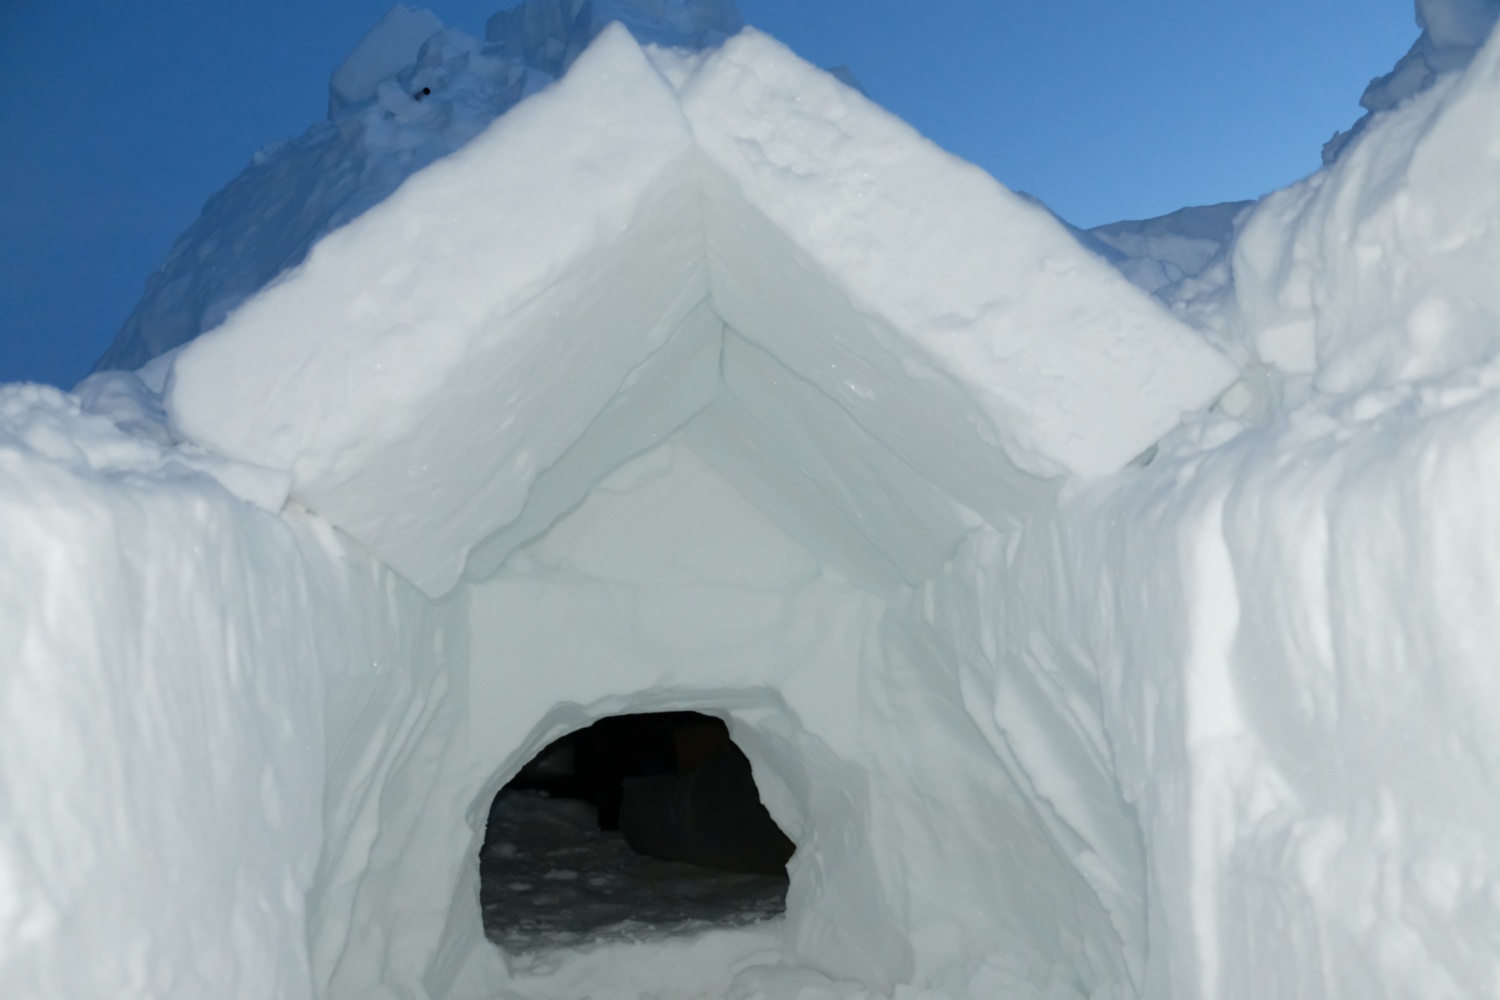 Snow house with 2 secitons of roof built.